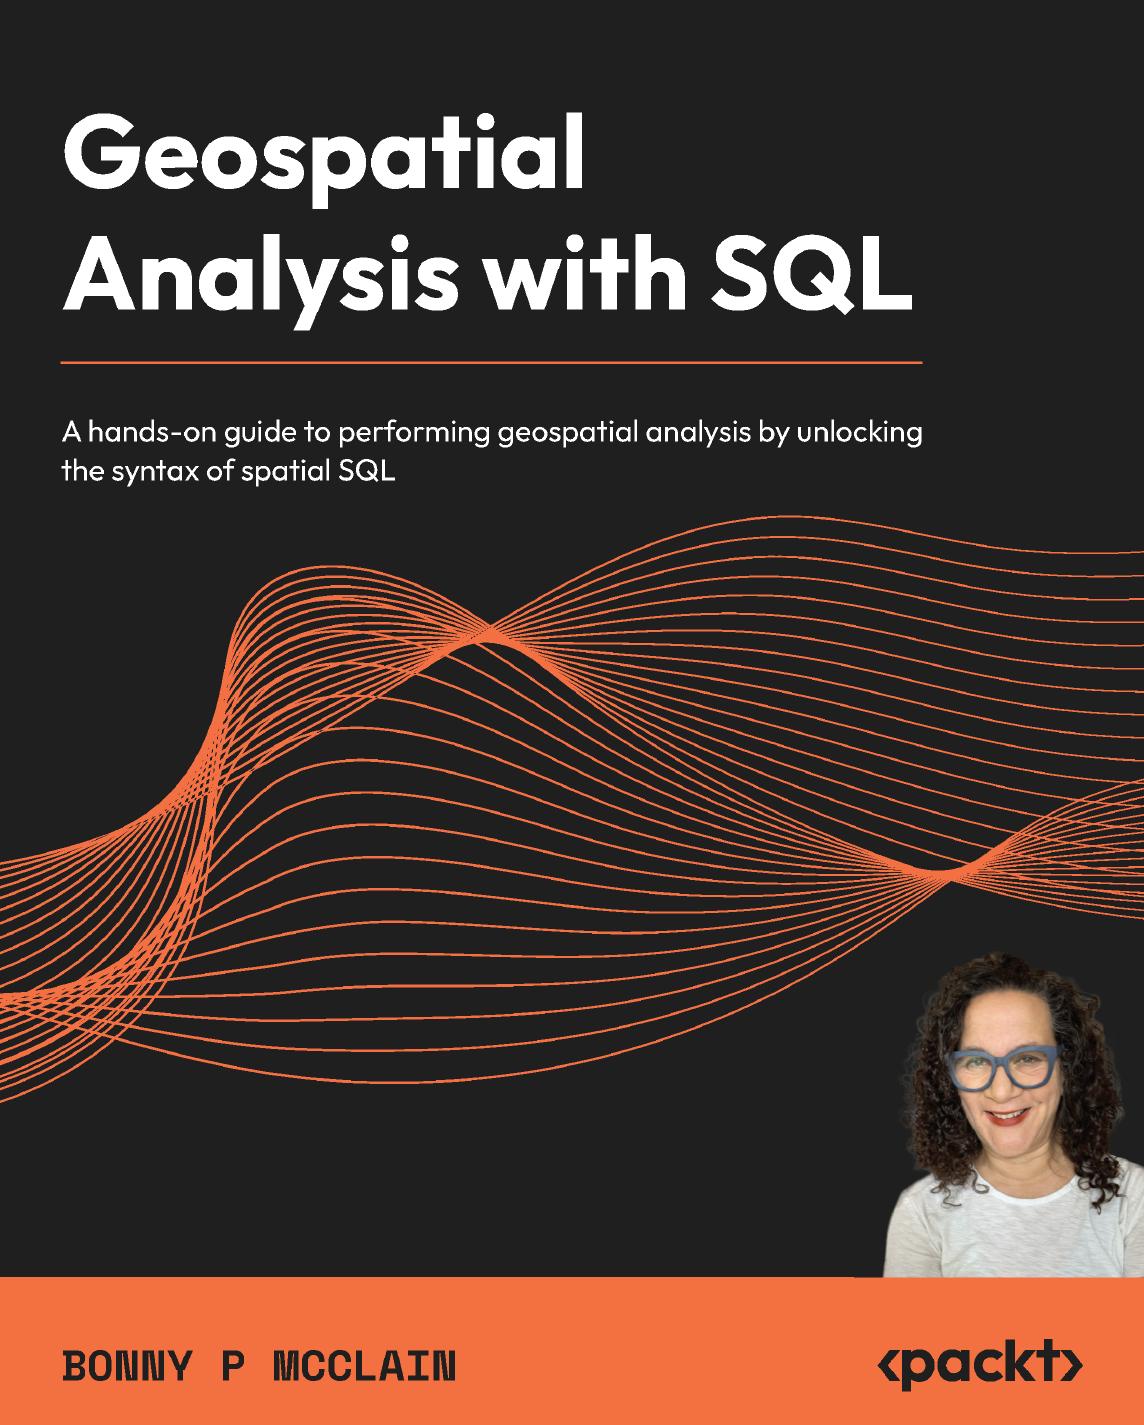 Geospatial Analysis with SQL: A hands-on guide to performing geospatial analysis by unlocking the syntax of spatial SQL by Bonny P McClain